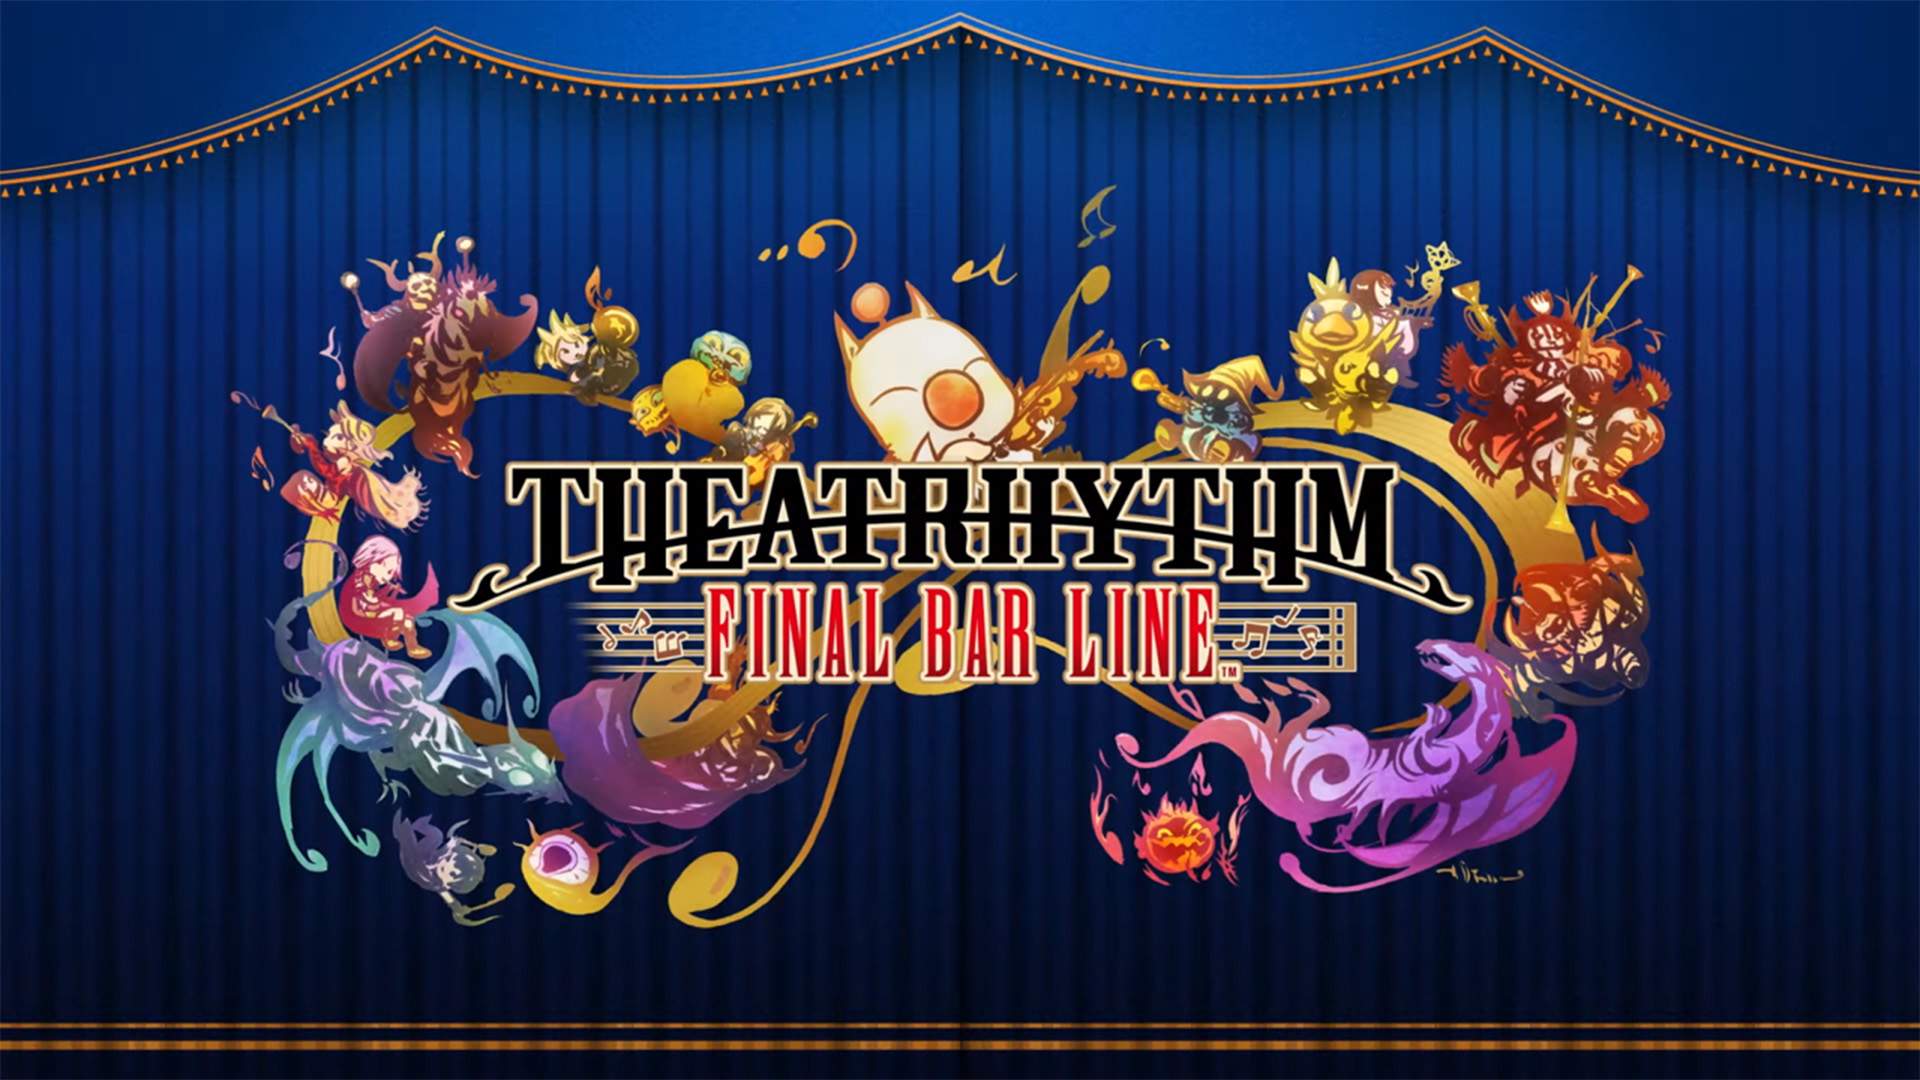 The game logo is shown over a blue and gold stage with fireworks and chibi characters from the game